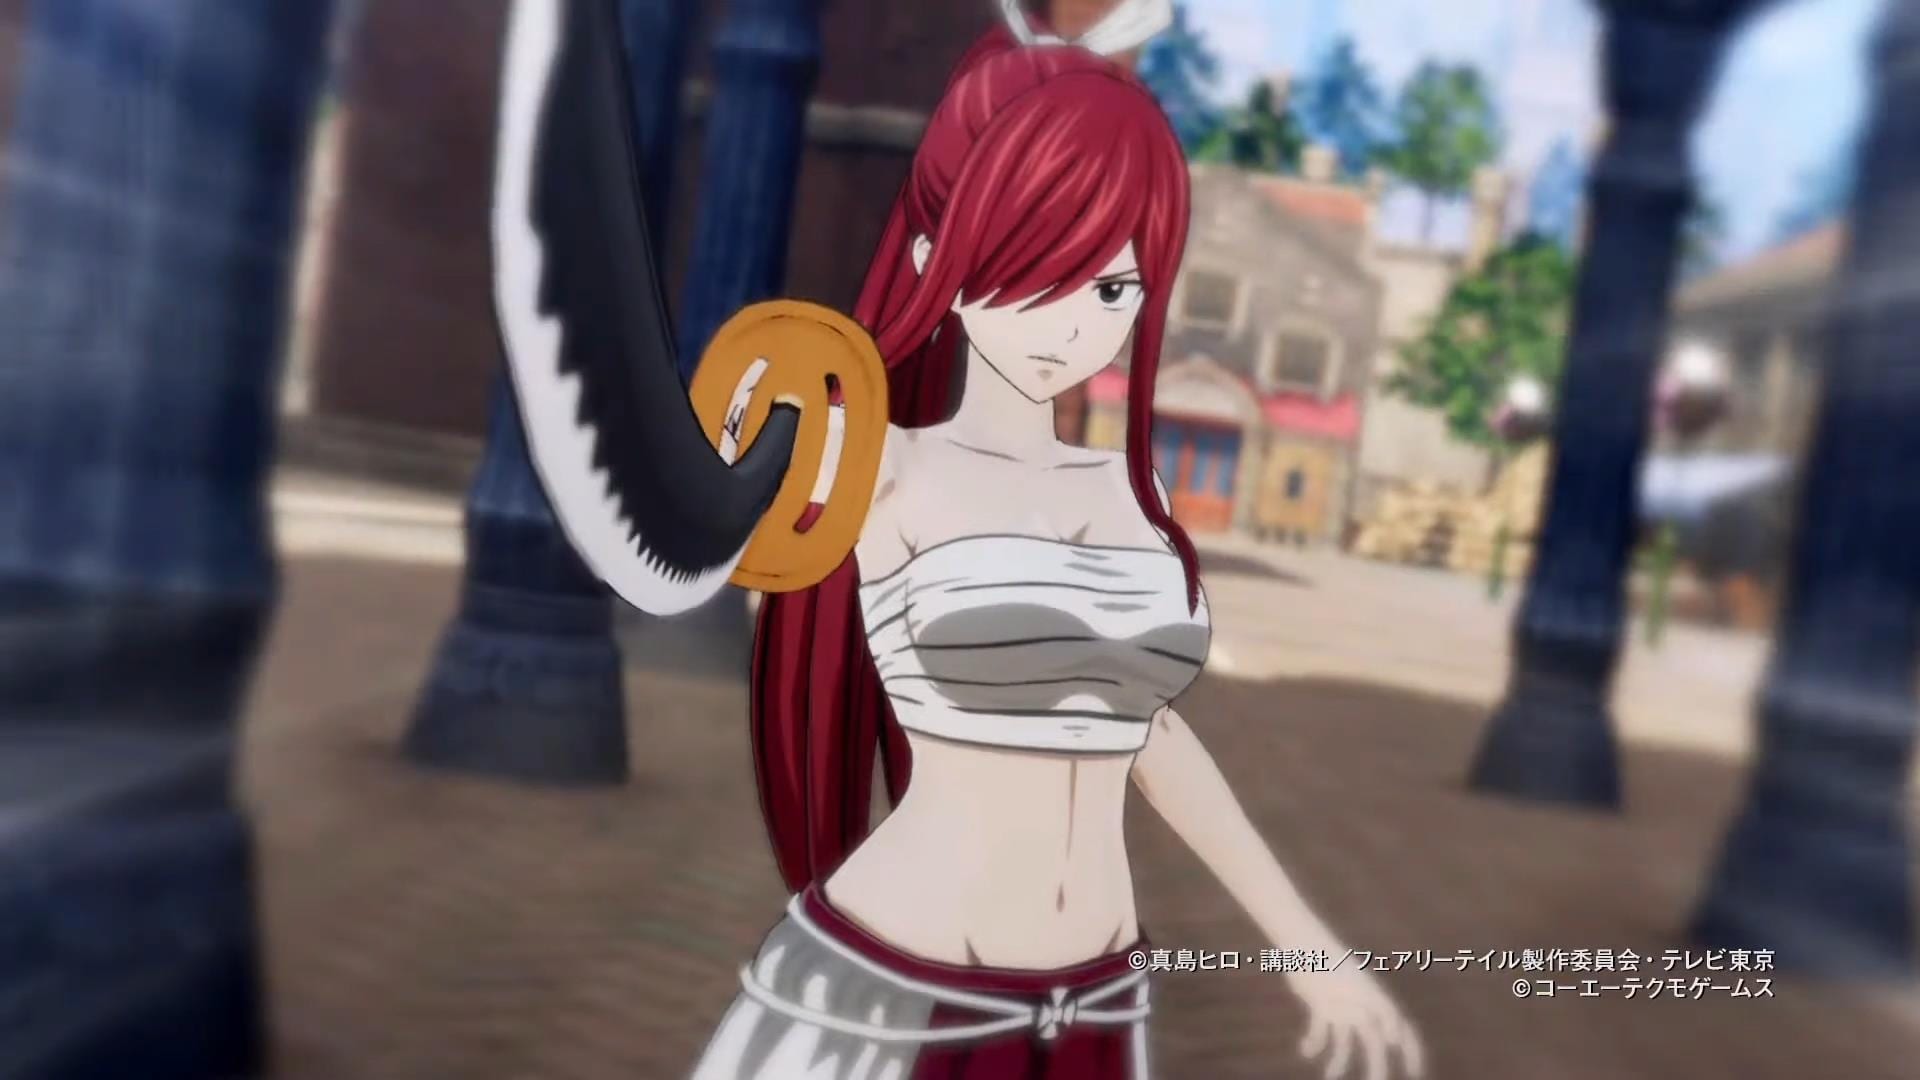 Fairy Tail JRPG Shows its Heroes and Familiar Scenes in New TV